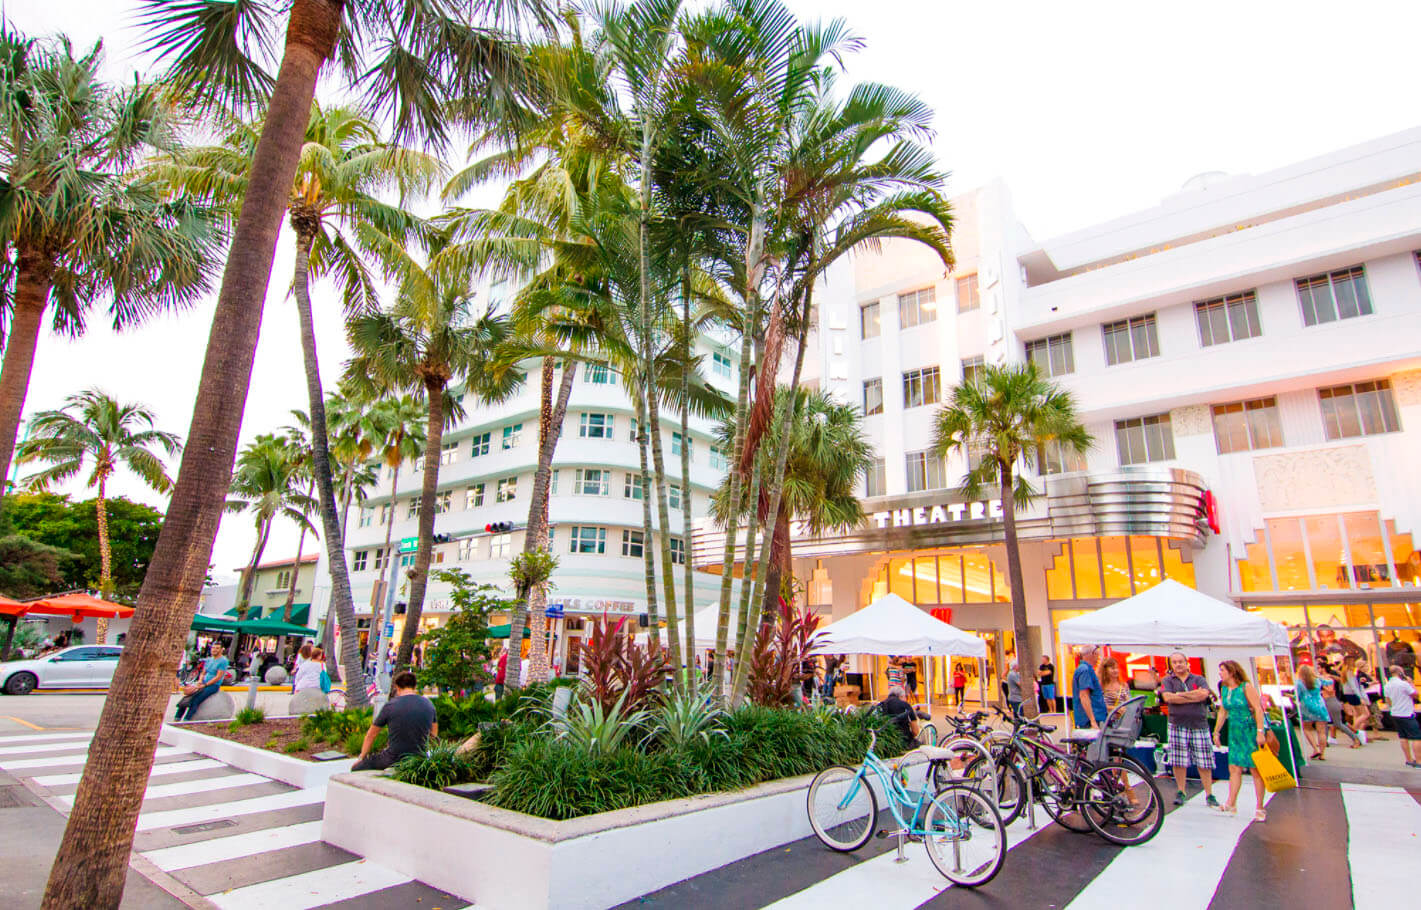 Best shopping malls & areas in Miami April 2023